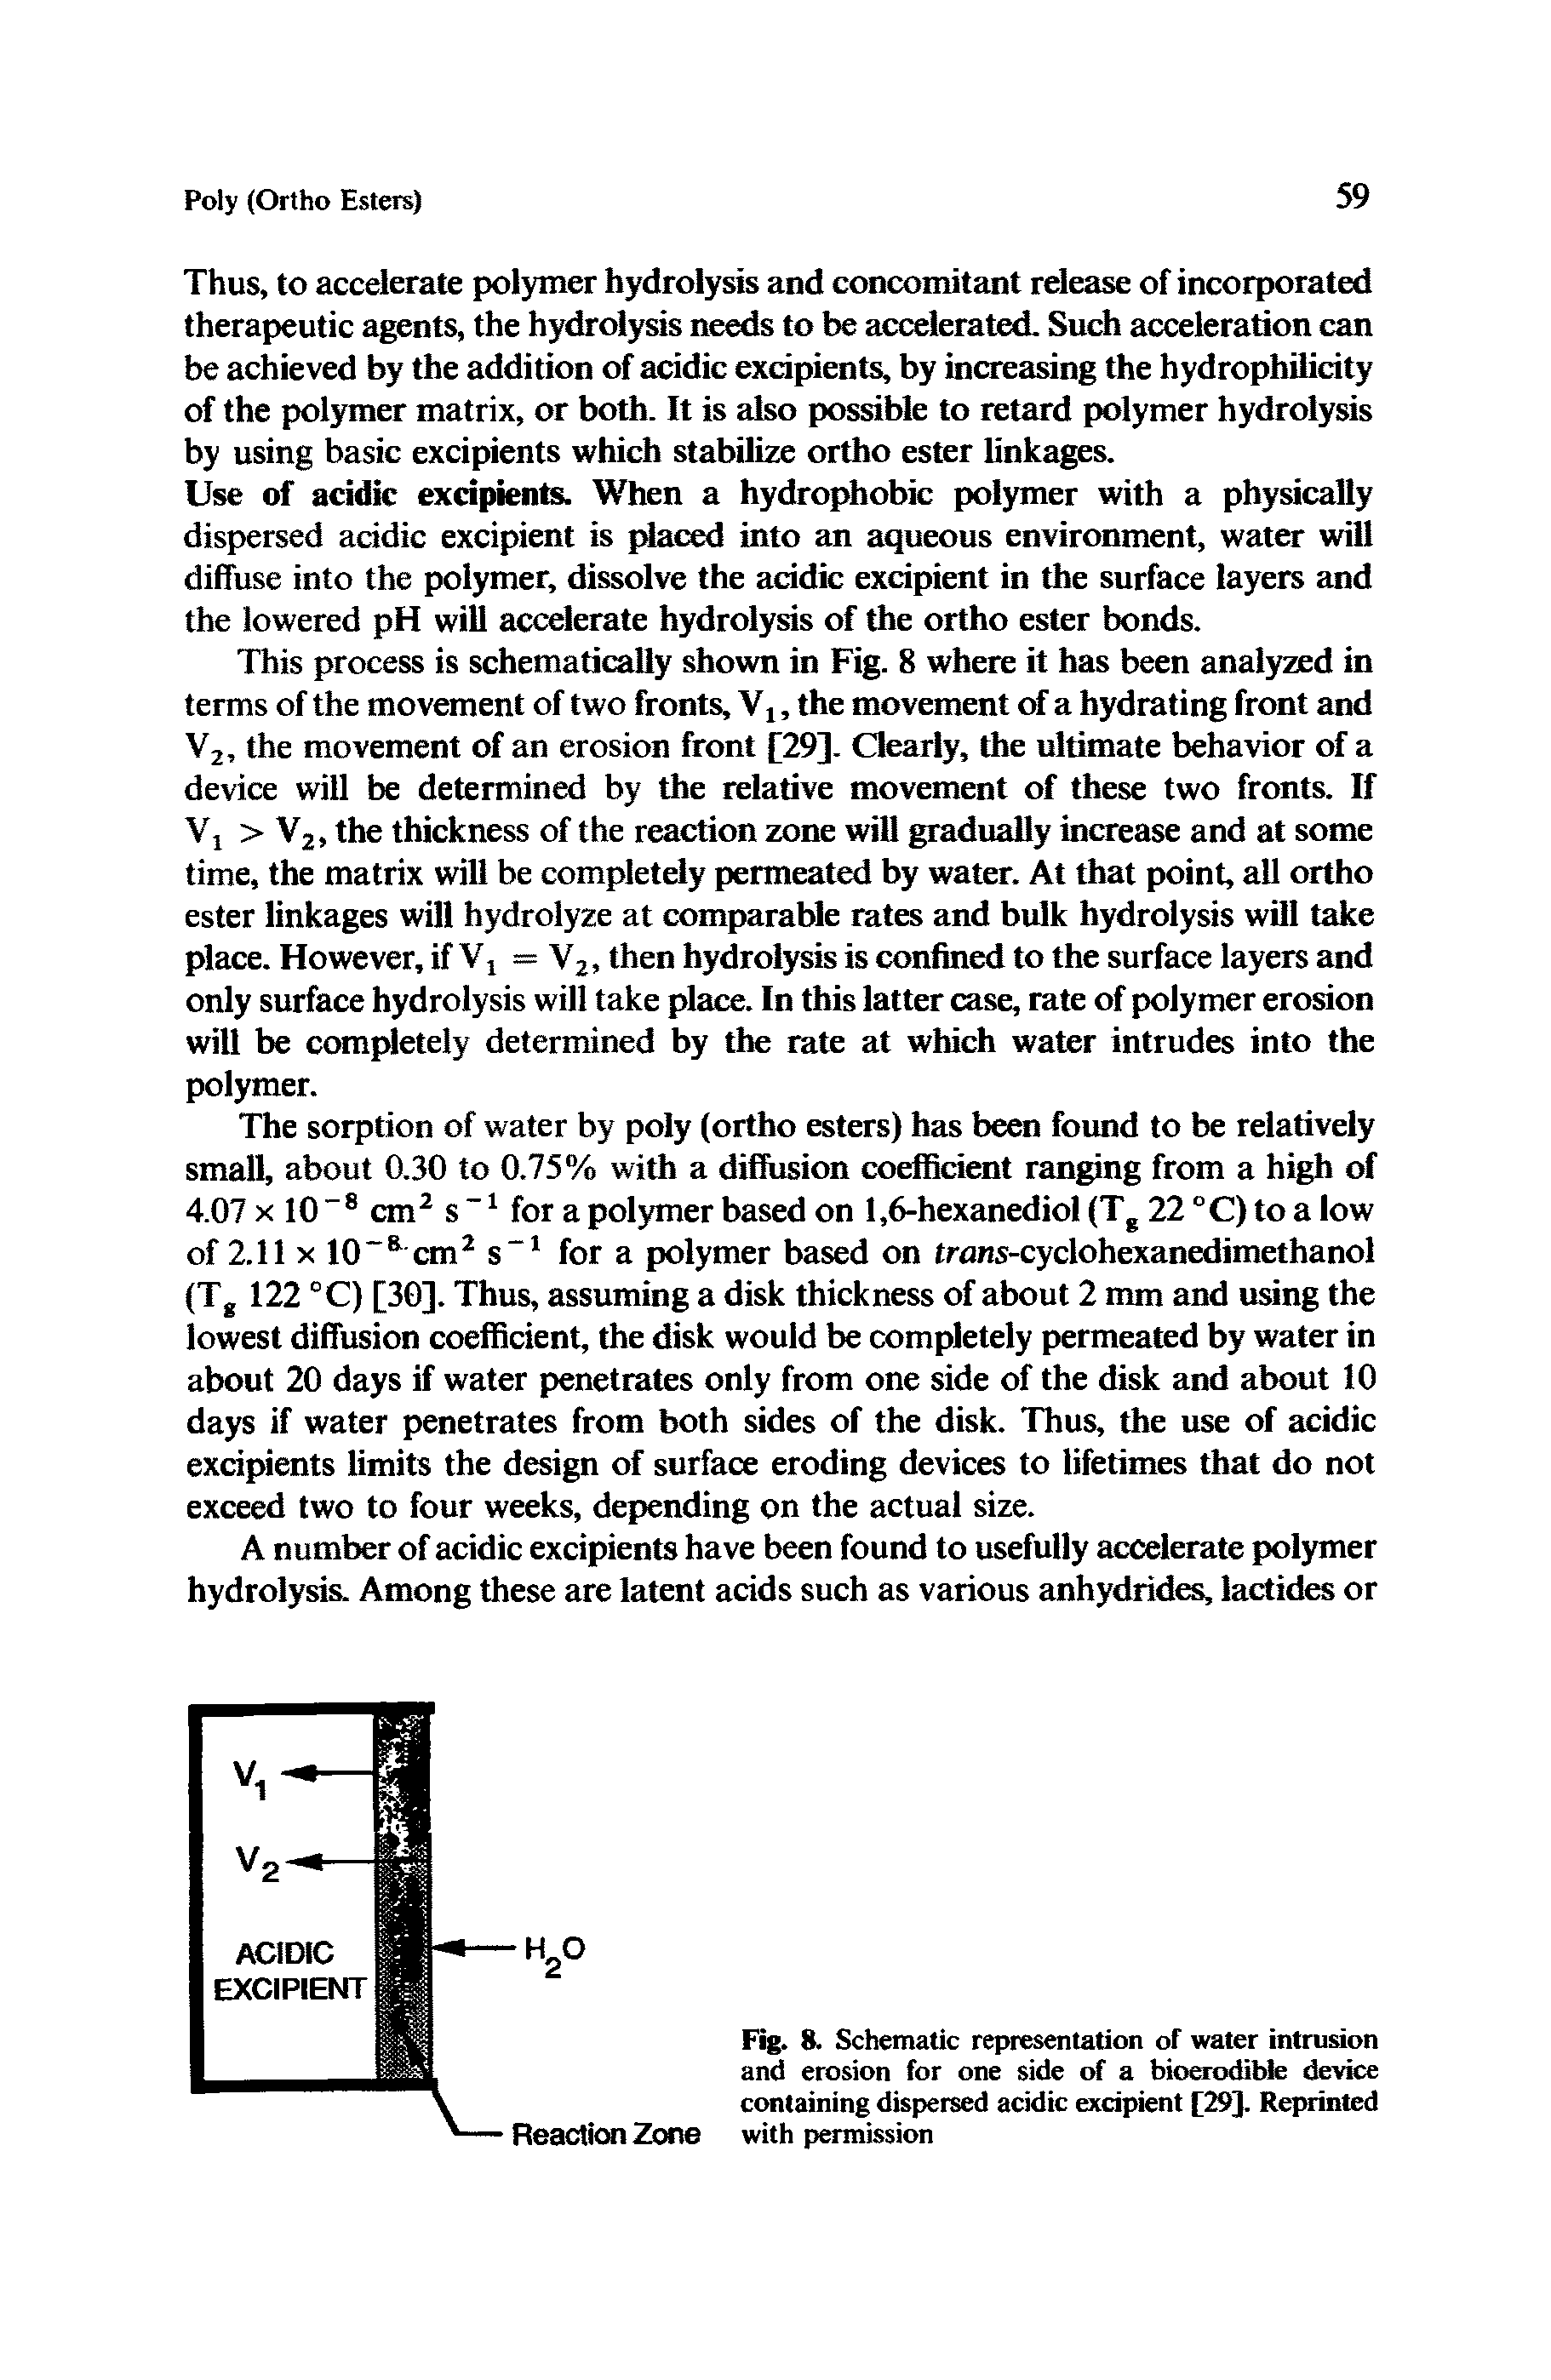 Fig. 8. Schematic representation of water intrusion and erosion for one side of a bioerodible device containing dispersed acidic excipient [29]. Reprinted with permission...